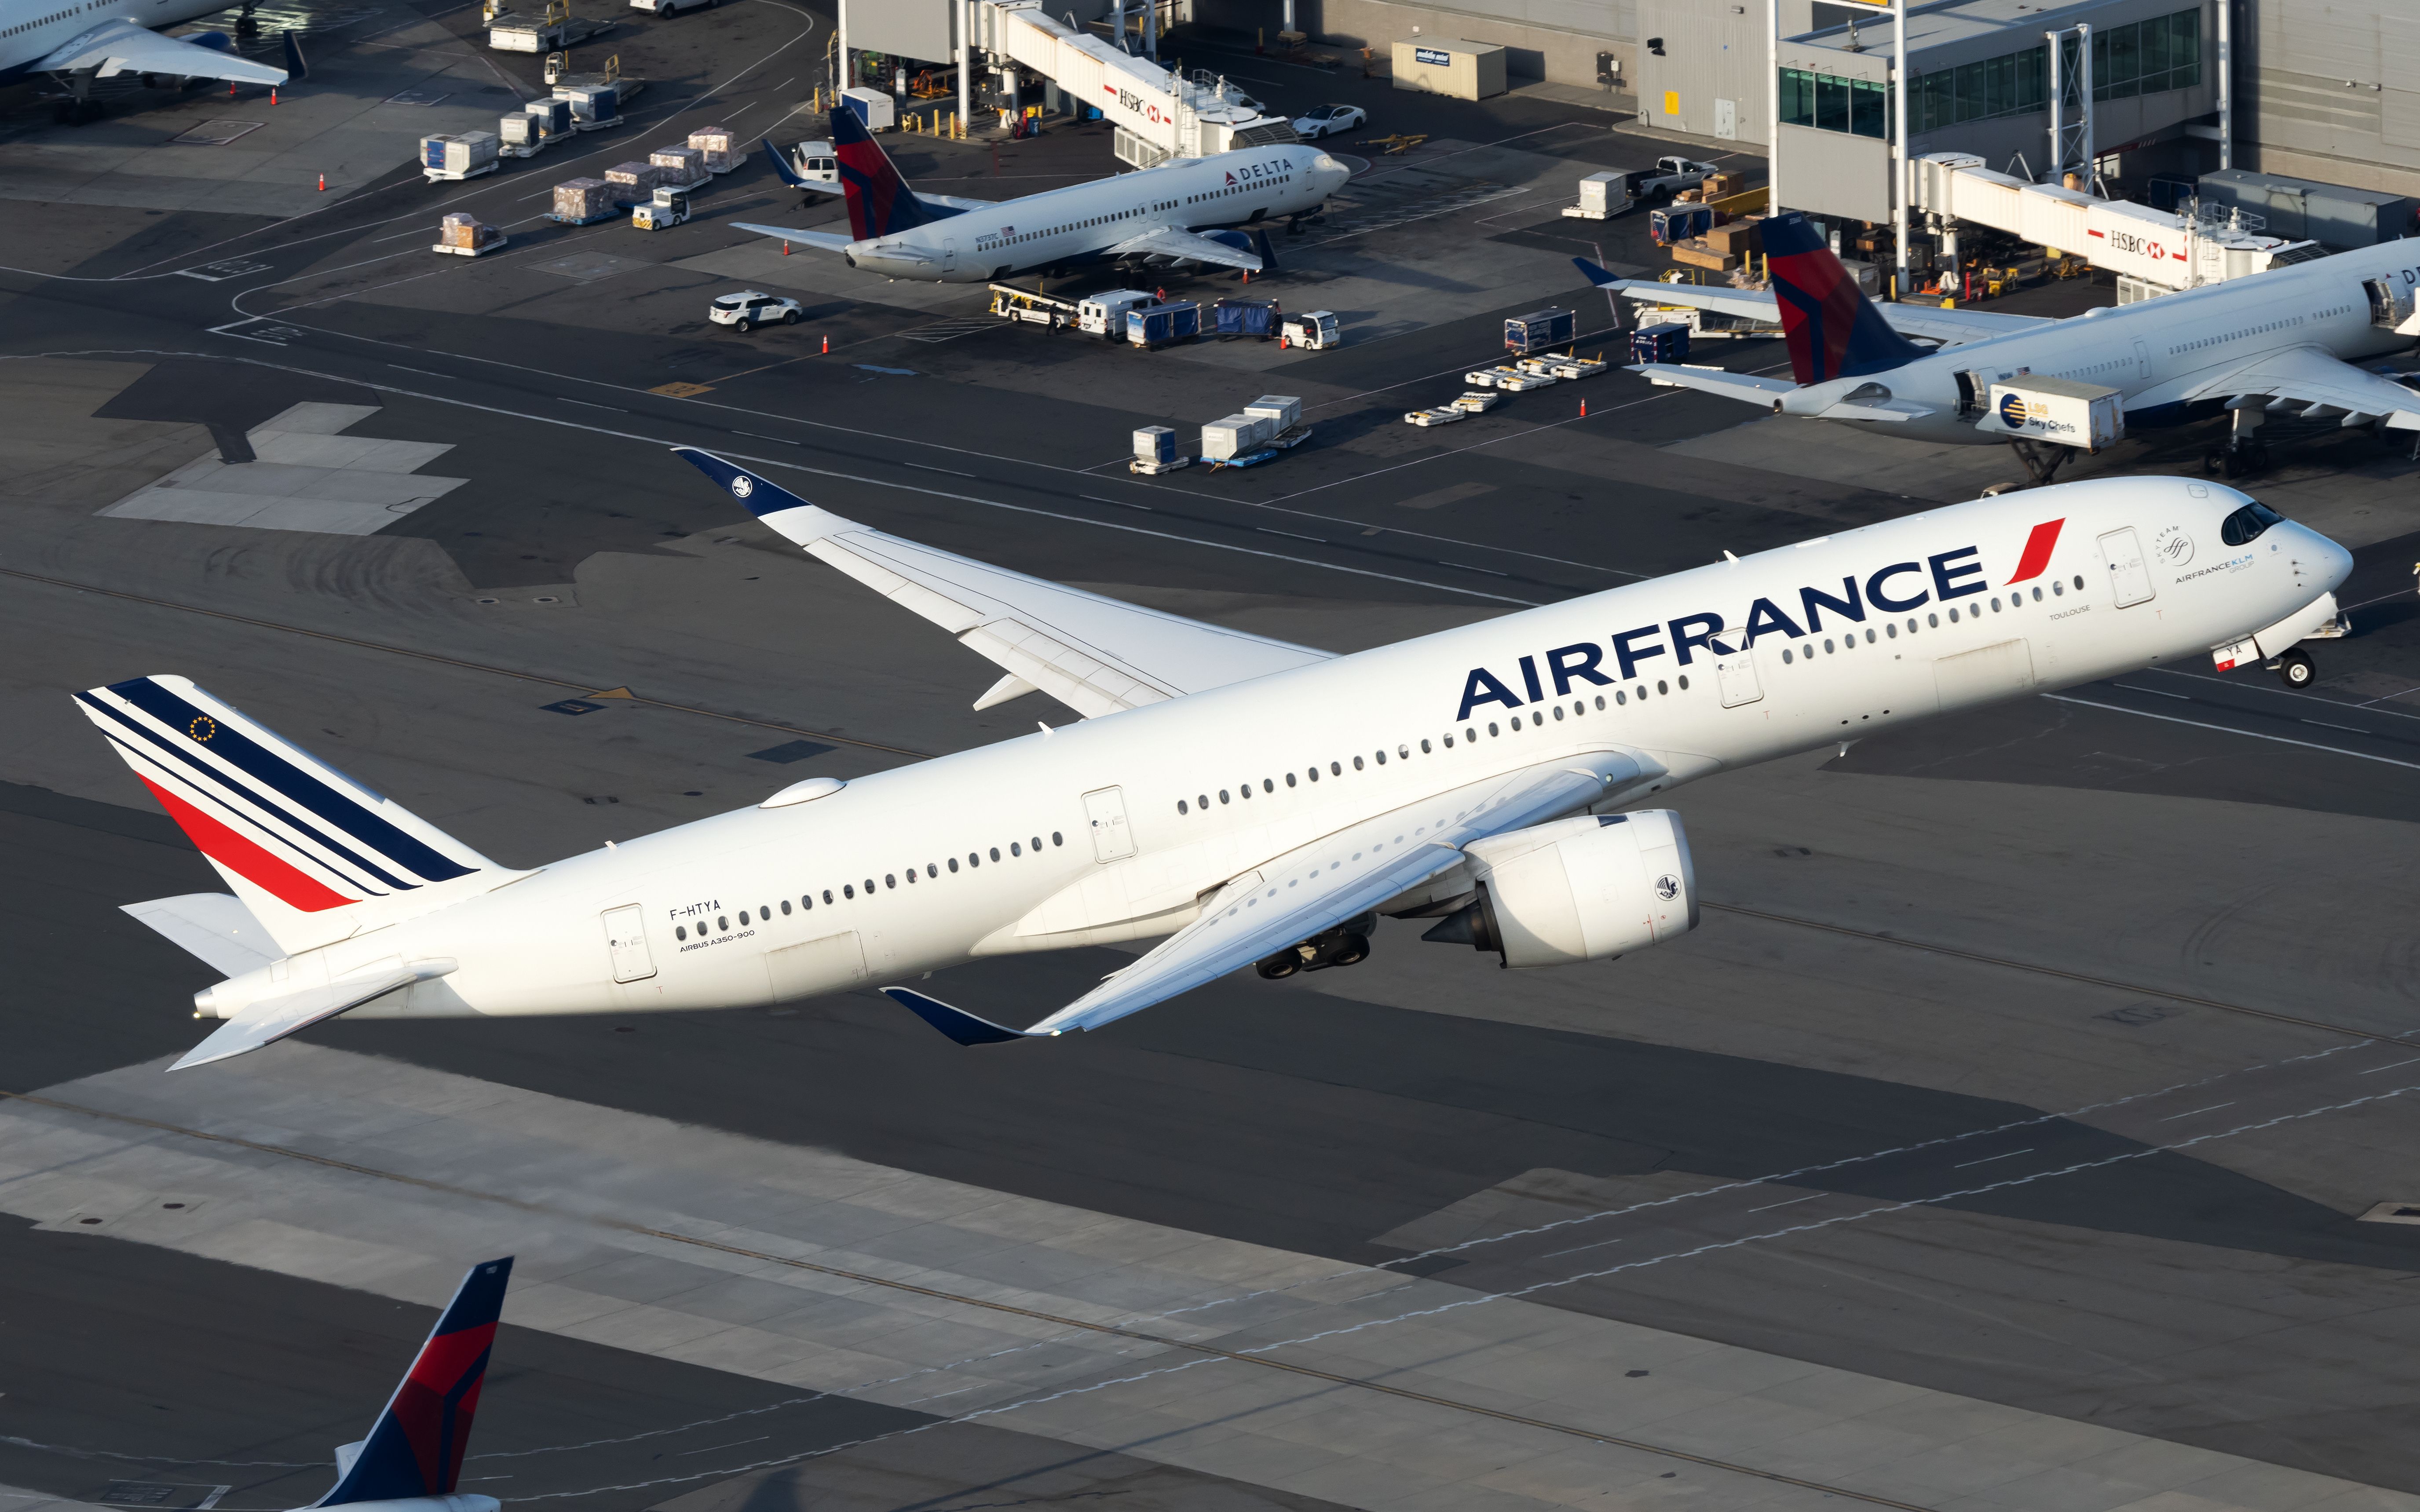 An Air France Airbus A350 just after taking off.